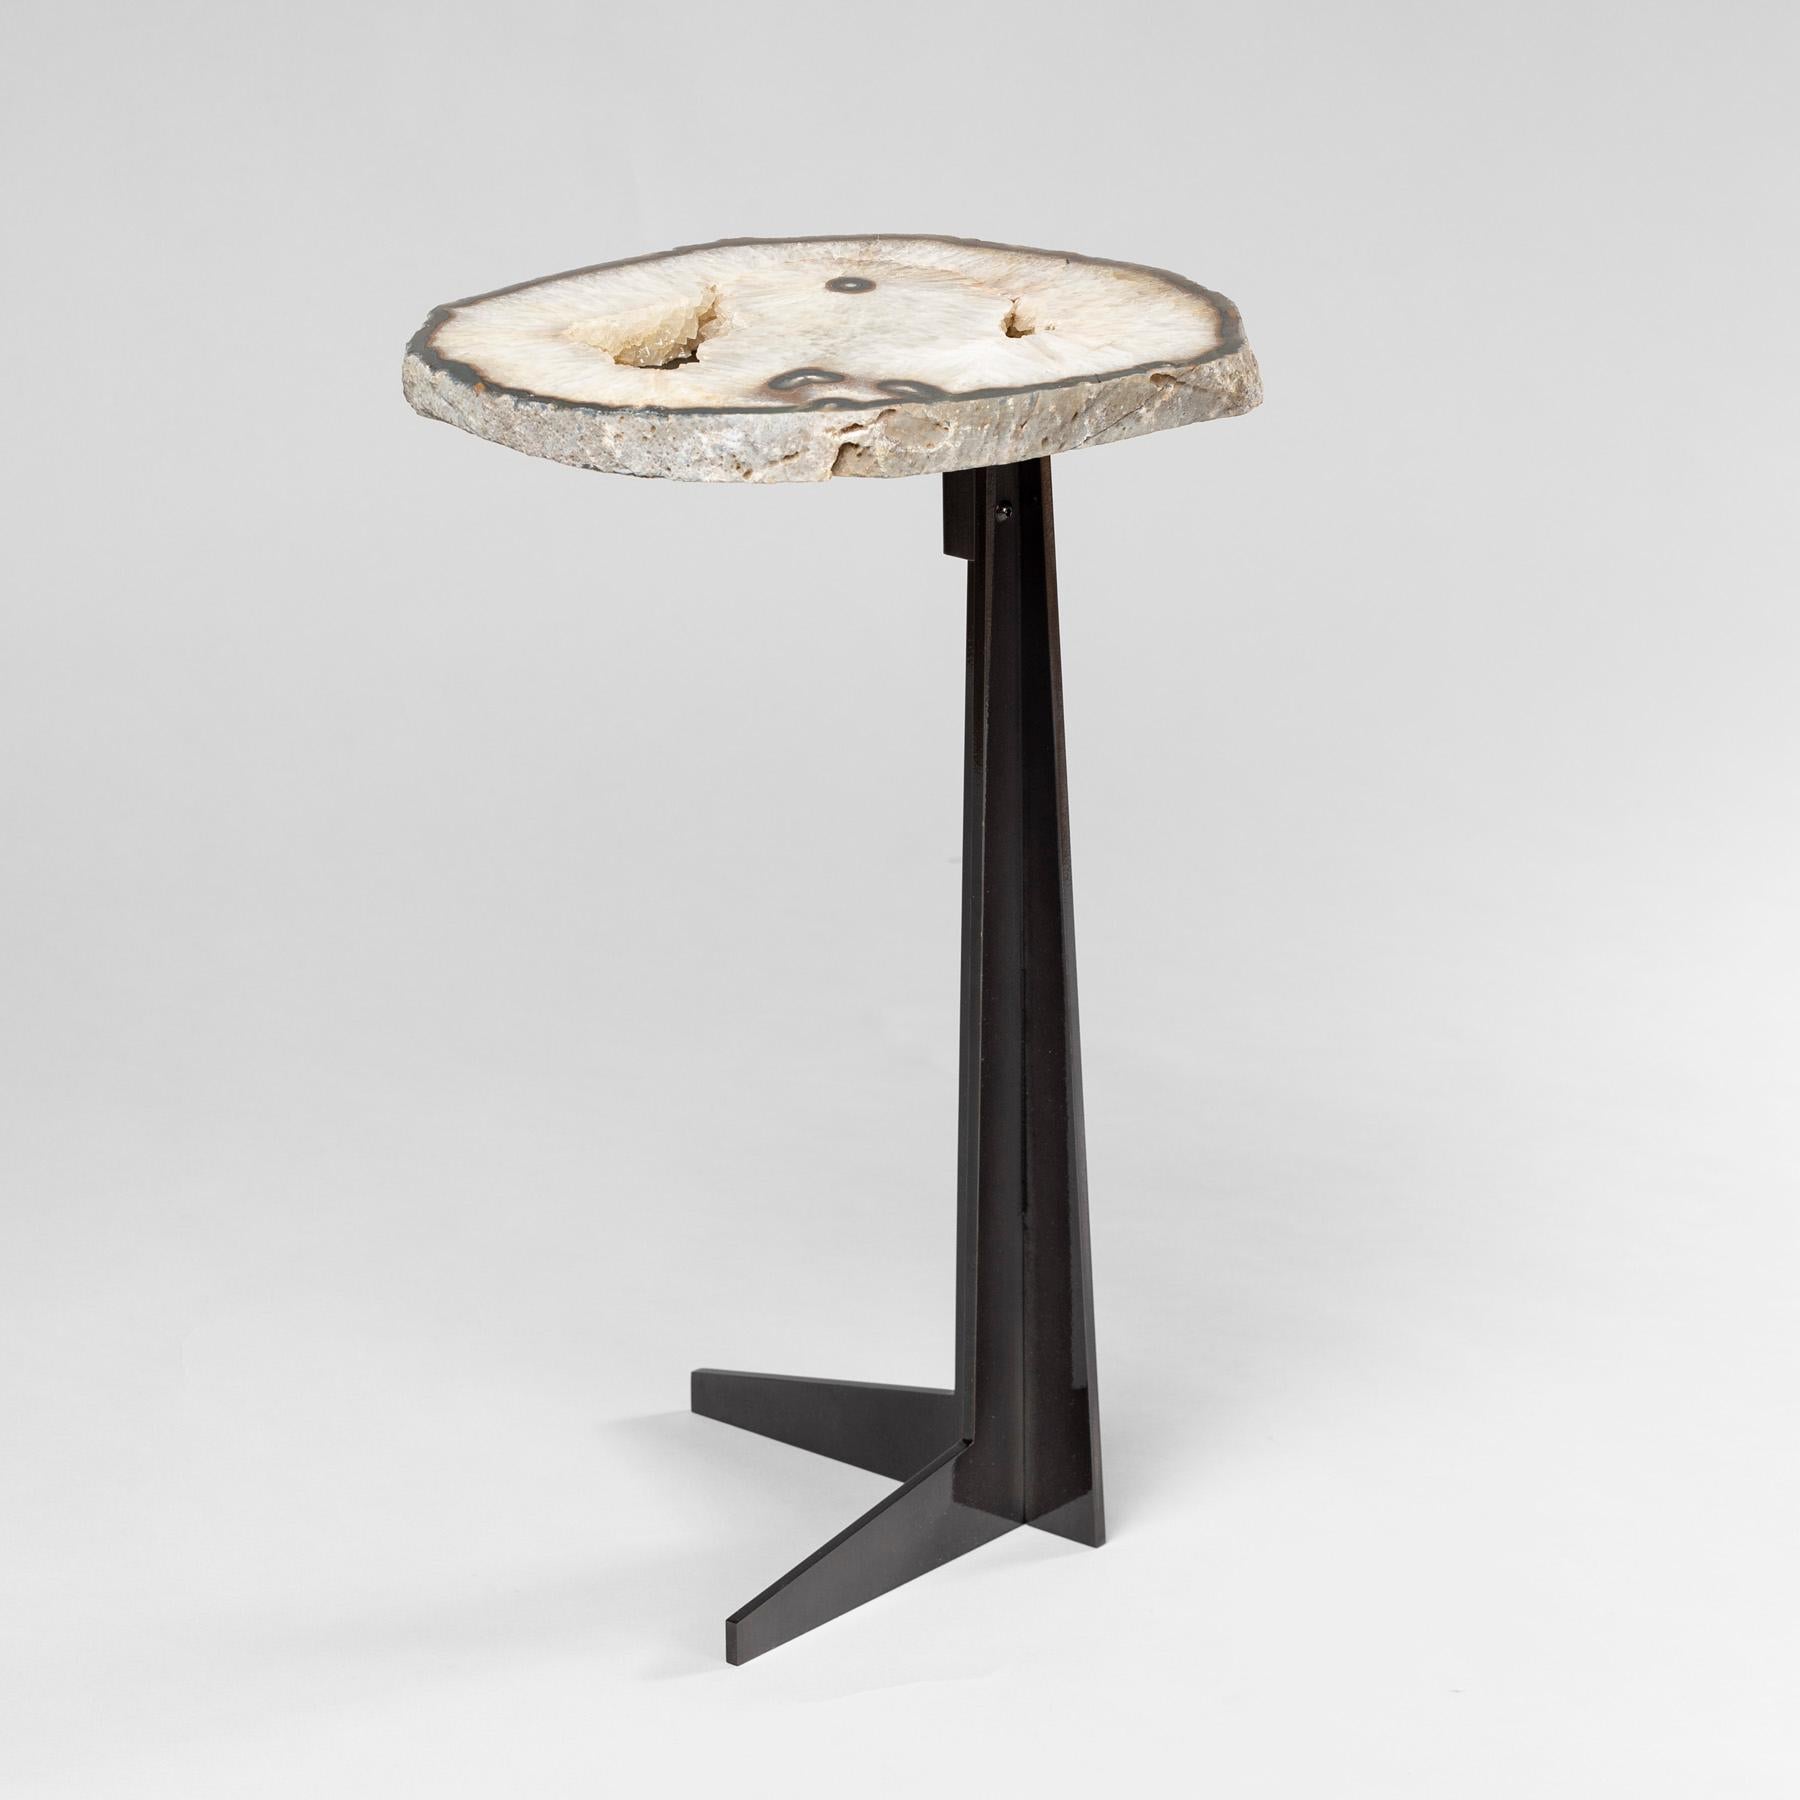 Mexican Side or Cocktail Table, Brazilian Agate with Black Color Metal Base For Sale